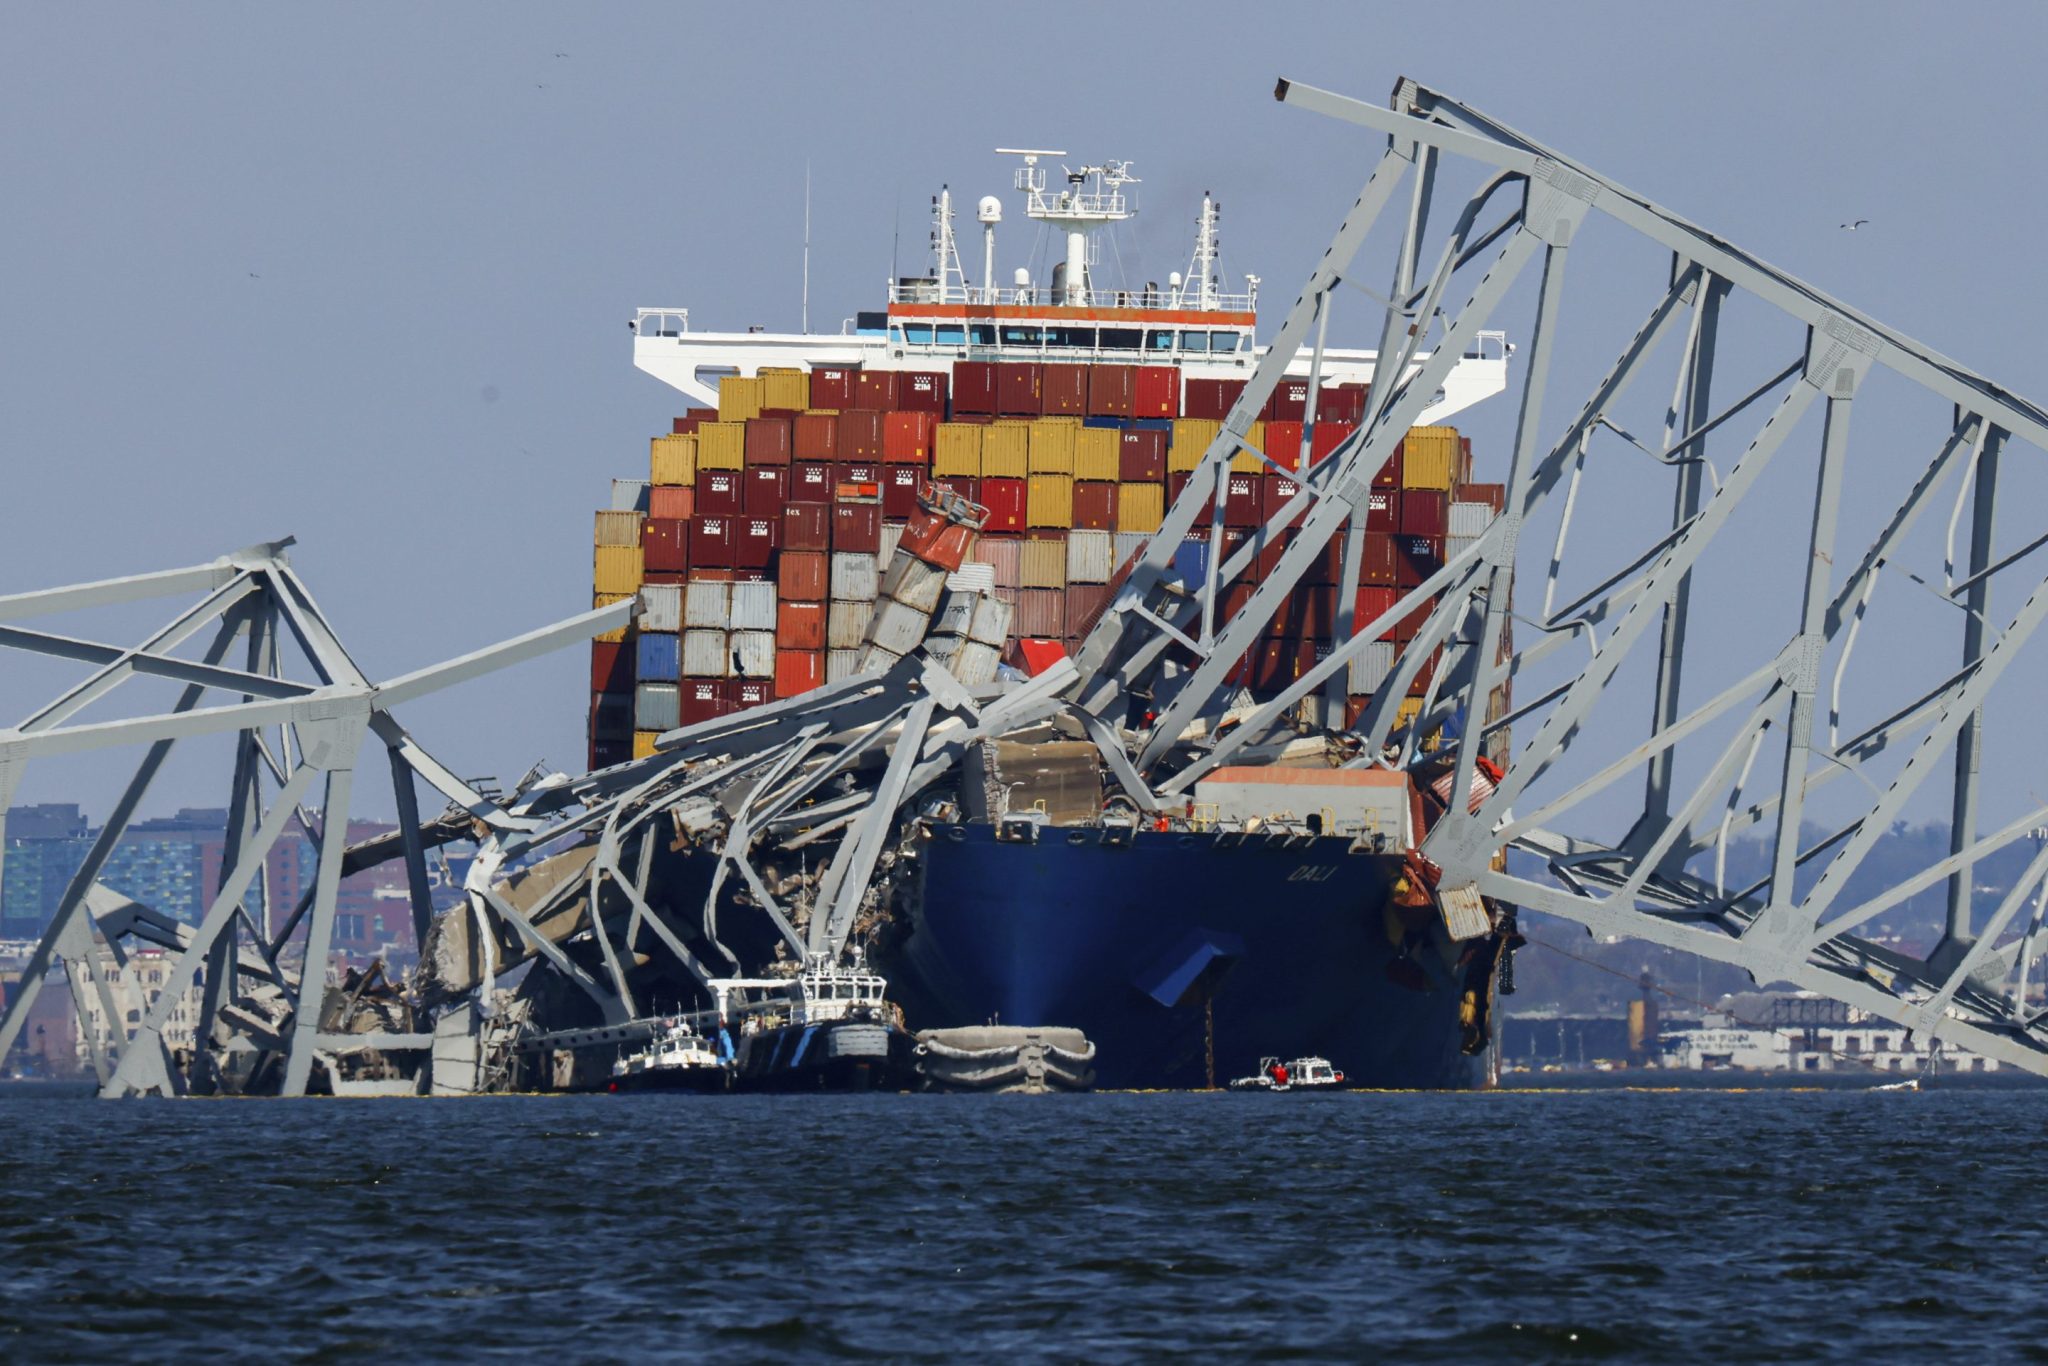 Dali, the ship that brought down Baltimore’s Francis Scott Key Bridge, is tangled in up to 4,000 tons of debris